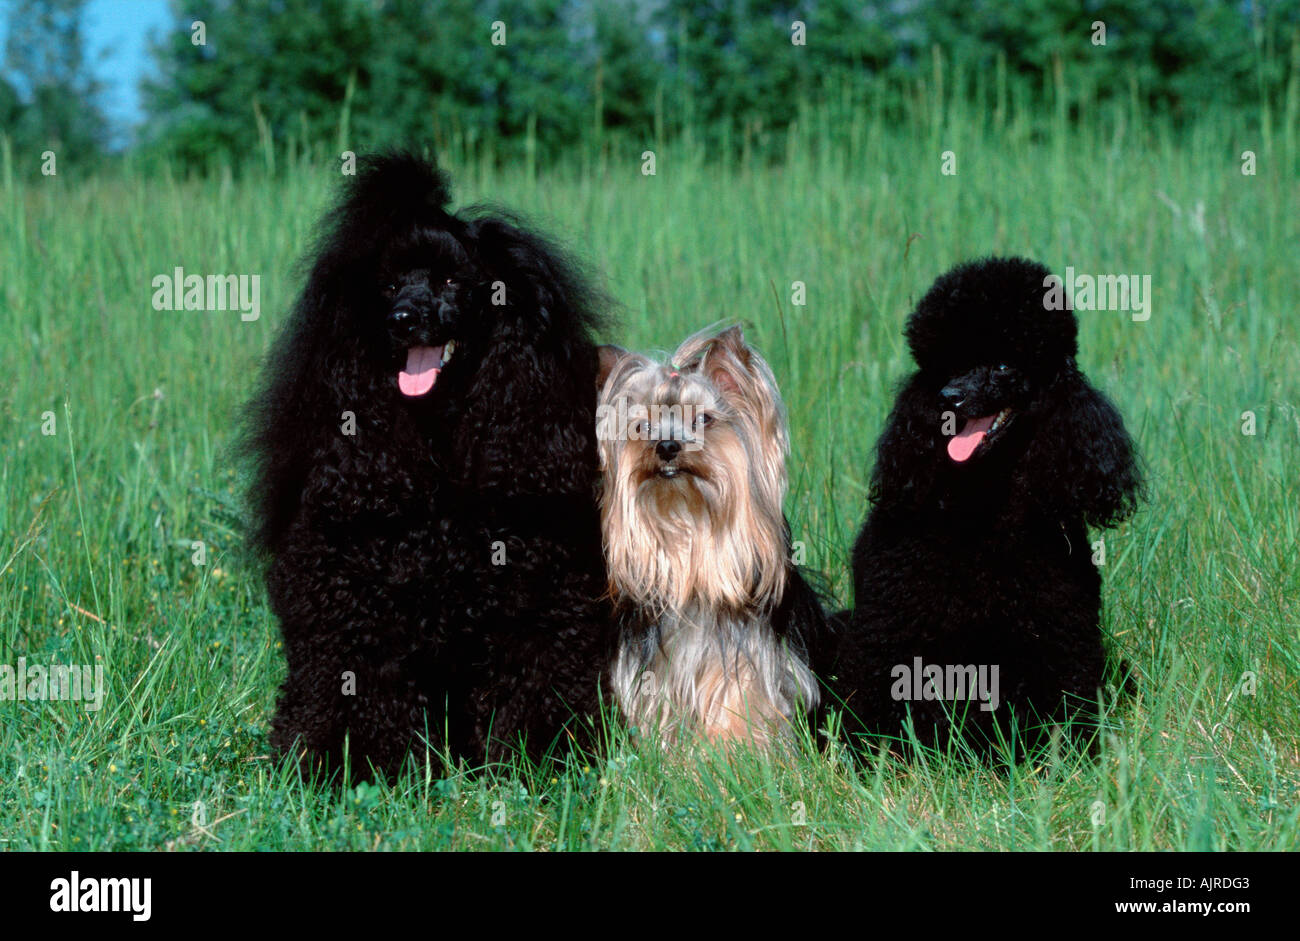 Miniature Poodle Yorkshire Terrier And Toy Poodle Stock Photo Alamy